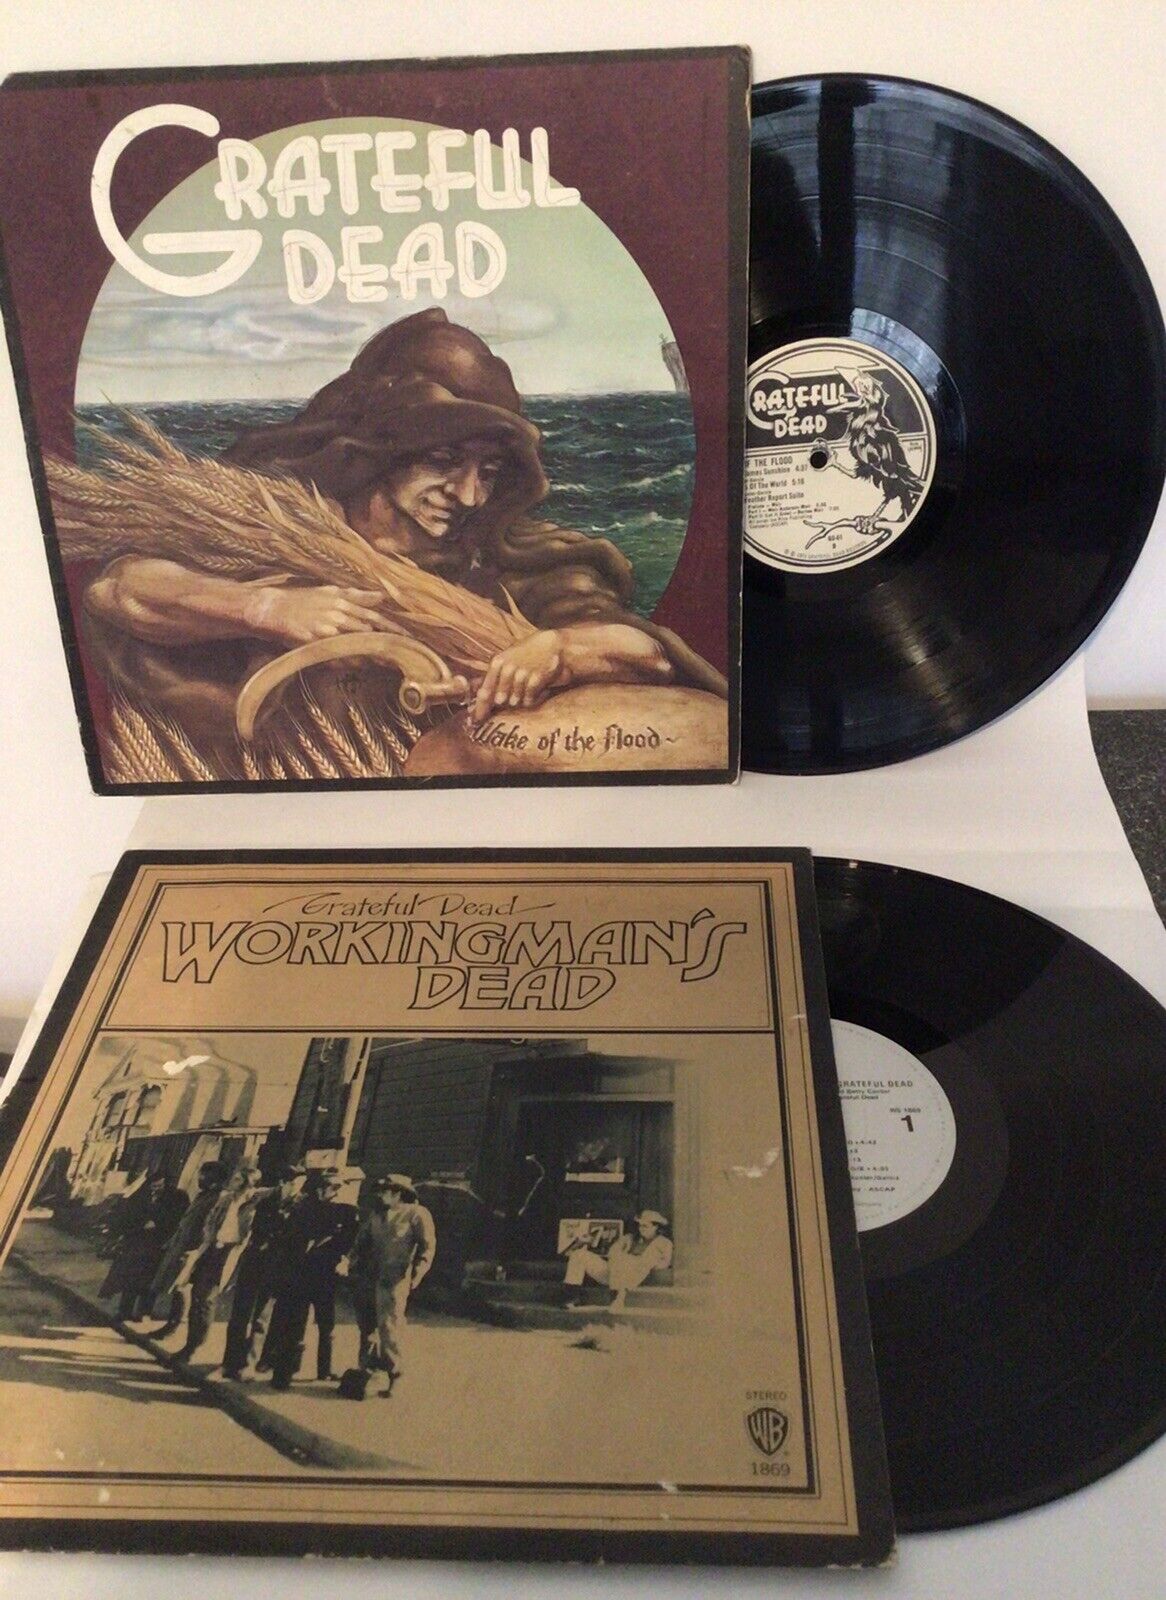 Vtg Grateful Dead Records, Workingman’s Dead and Wake of the Flood